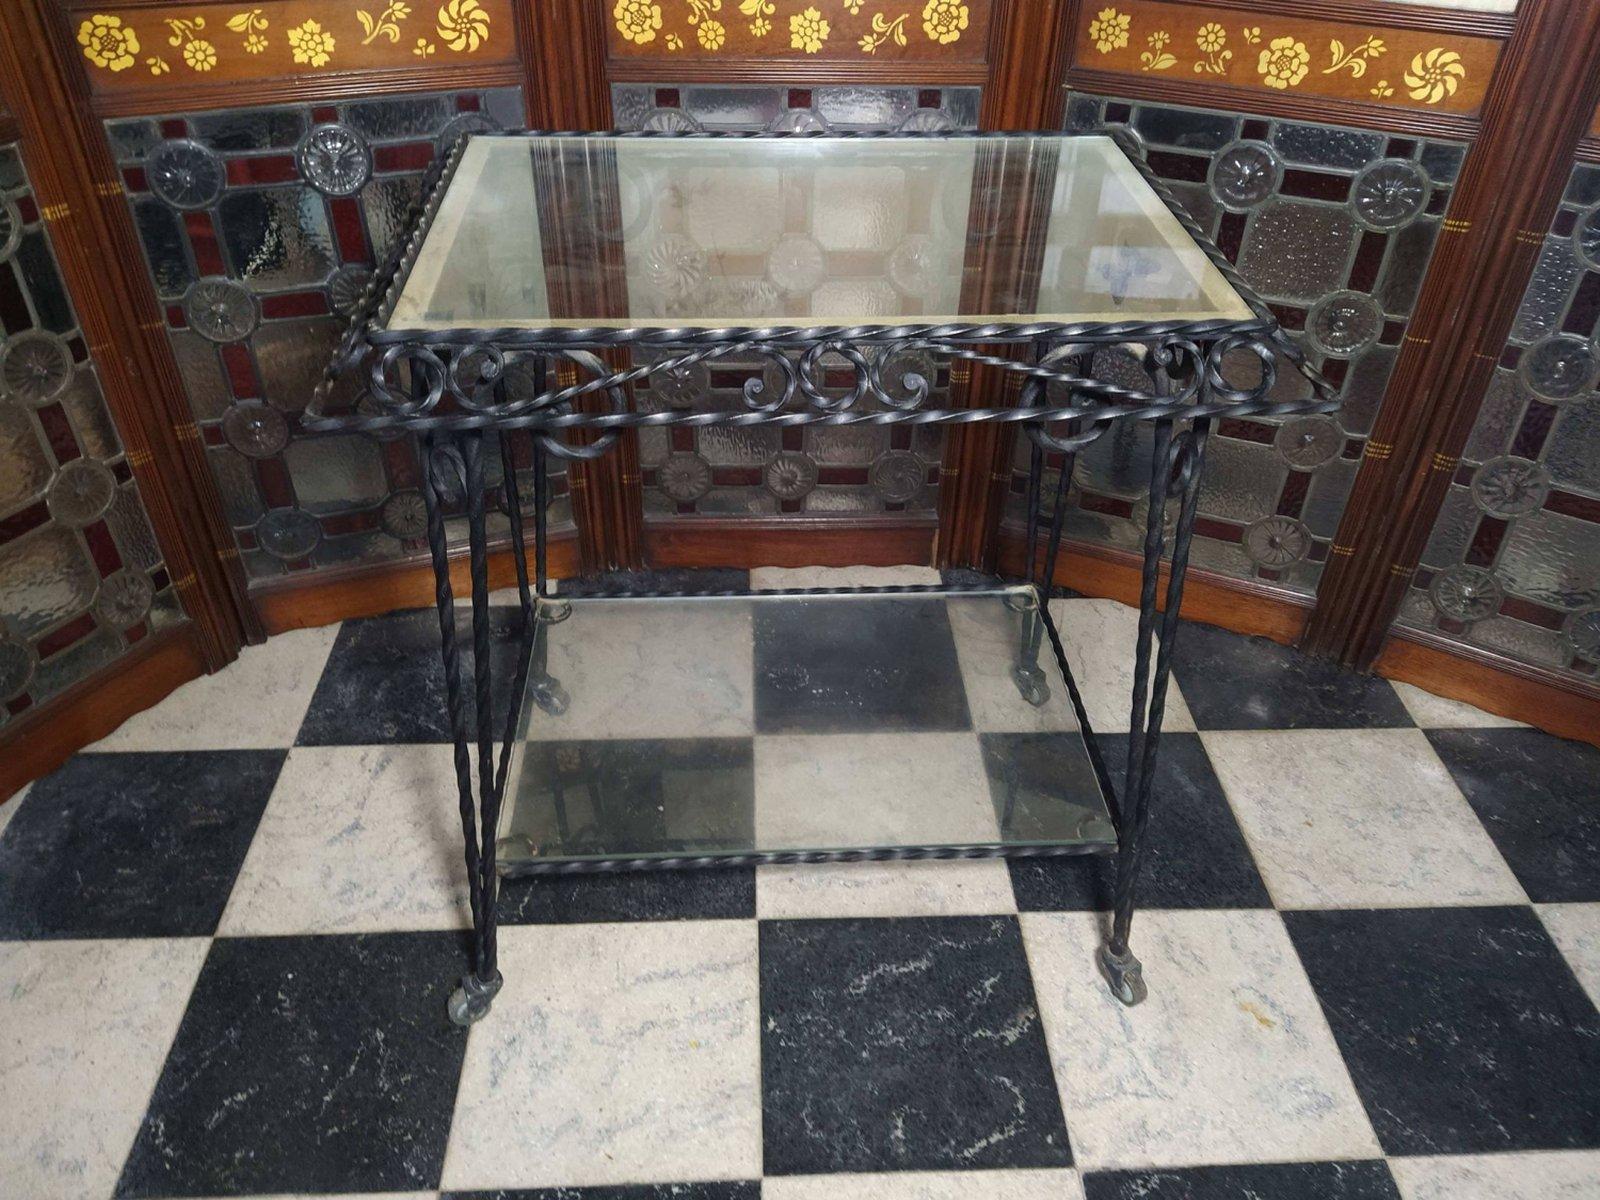 A Mid Century French Glass & Wrought Iron Two Tier Tea or dessert Trolley on castors with decorative hand-worked scrollwork details.